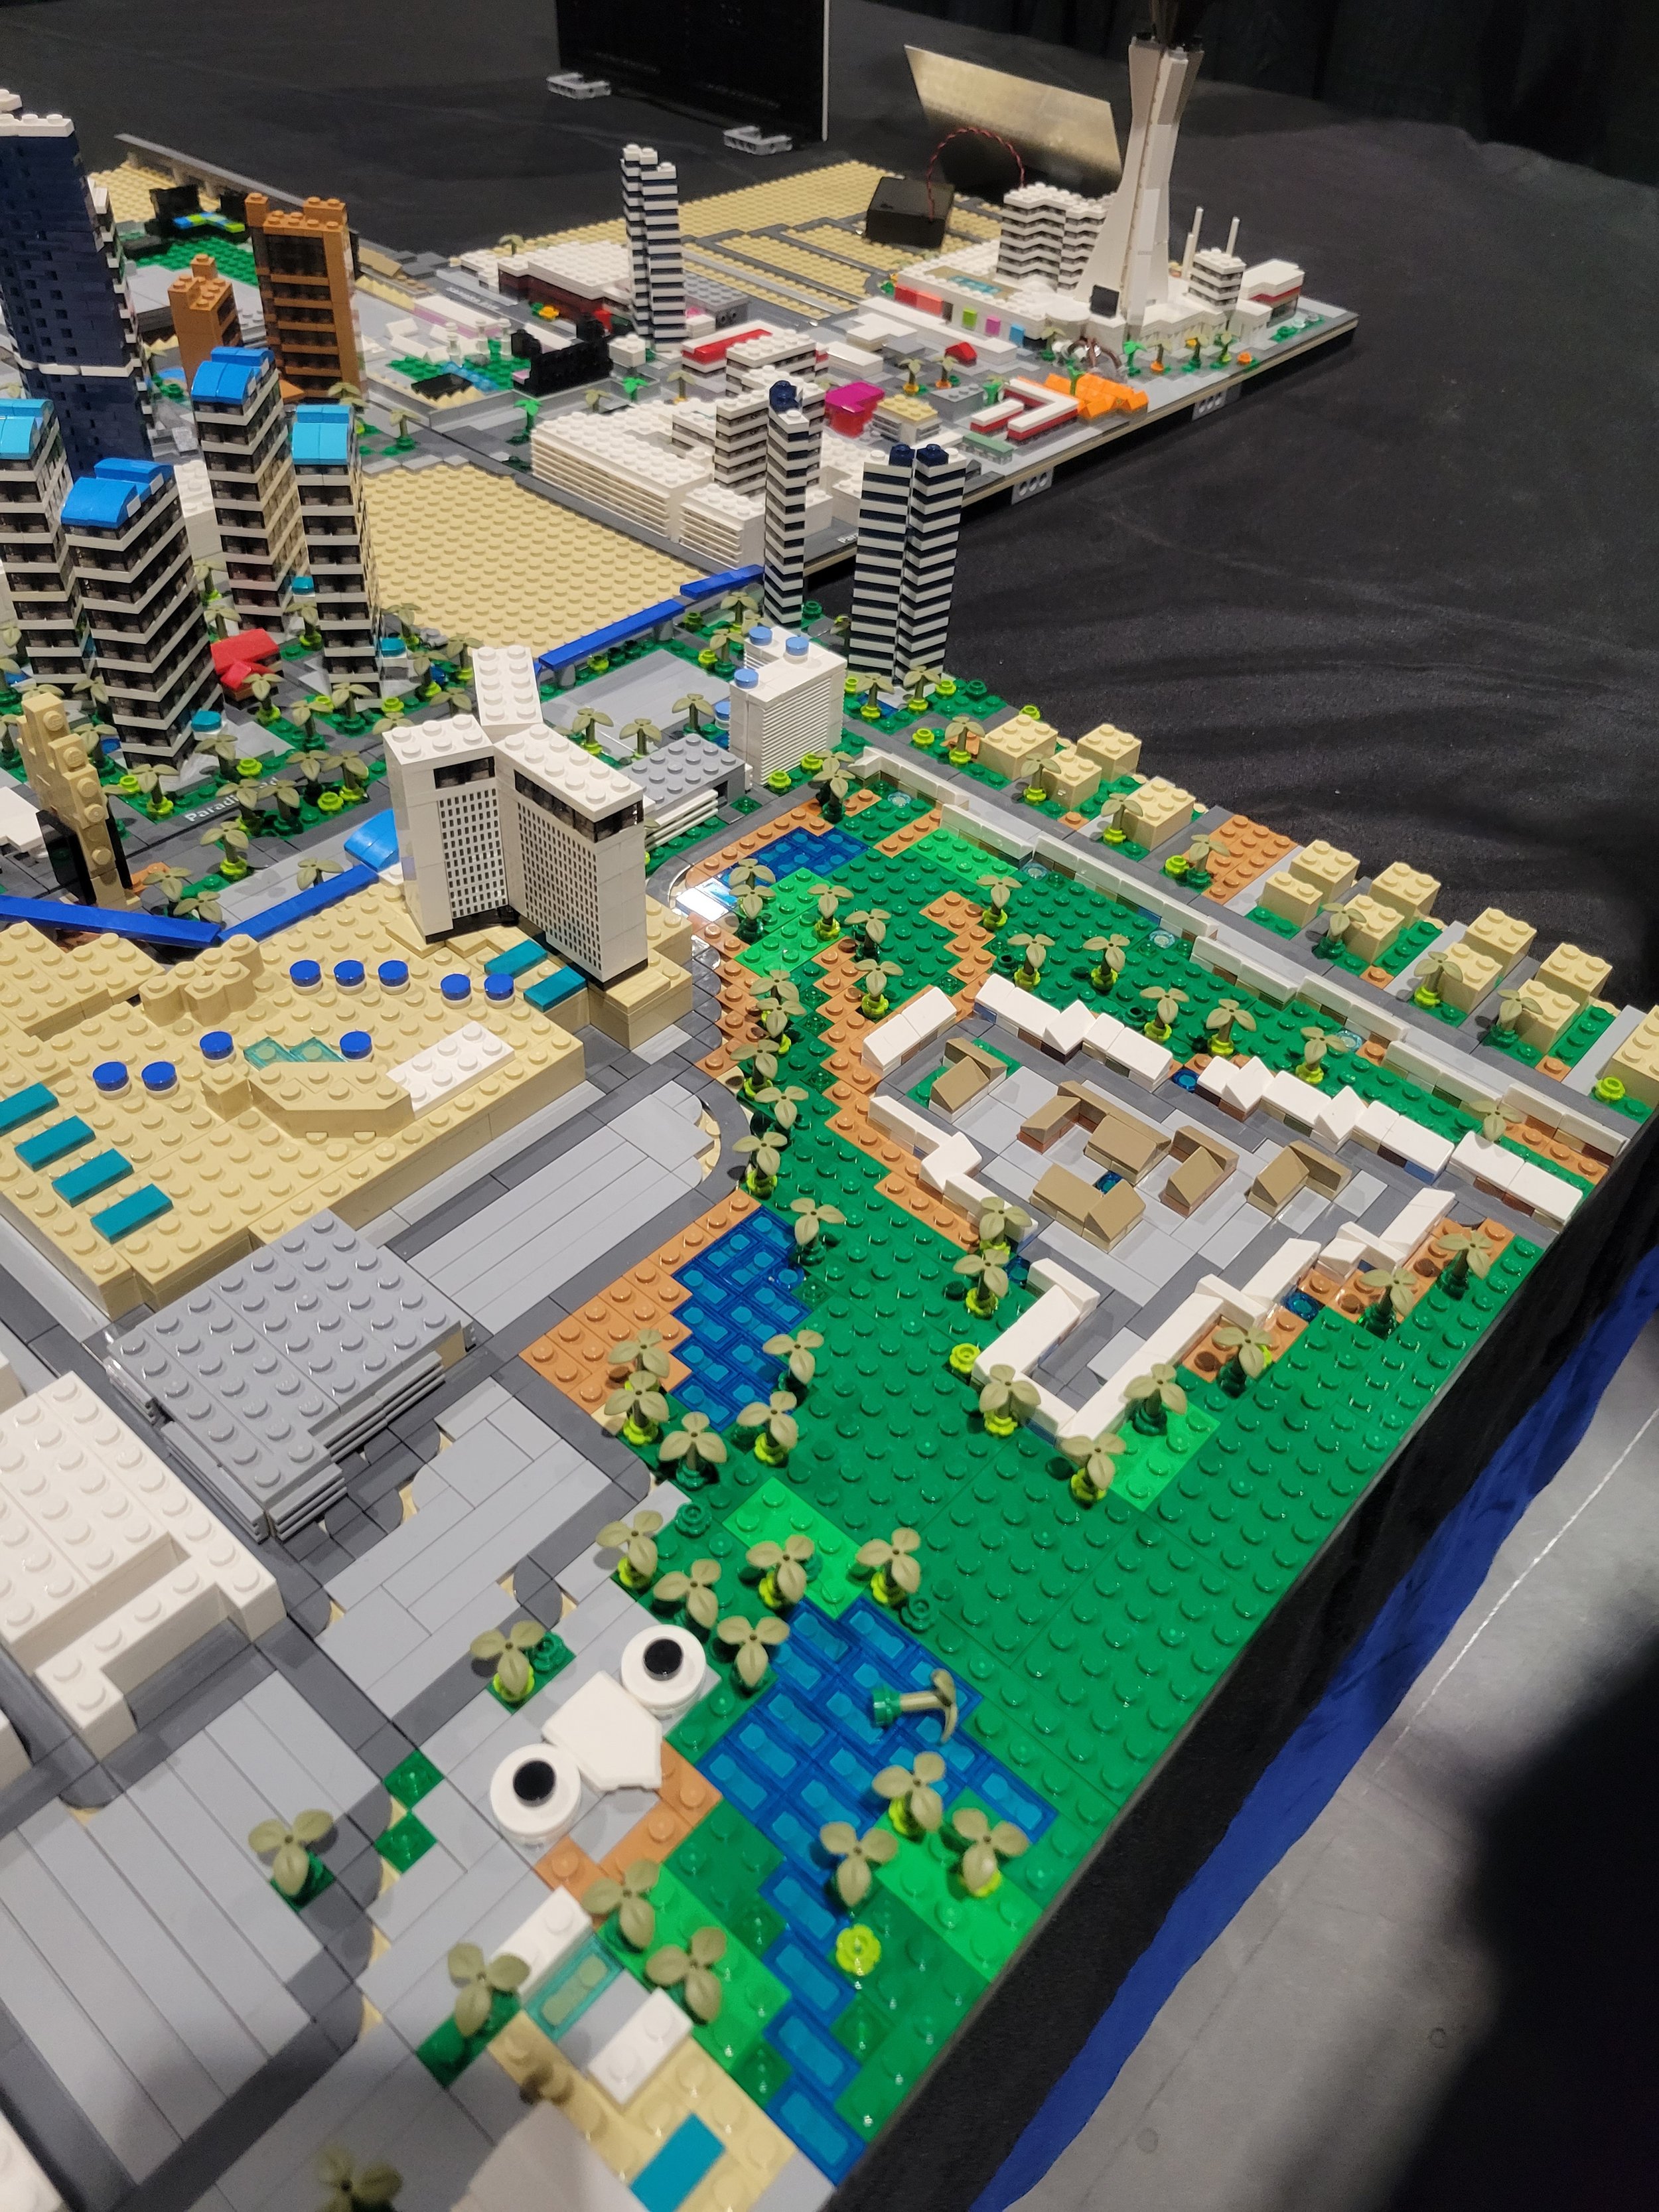 The White City - BrickNerd - All things LEGO and the LEGO fan